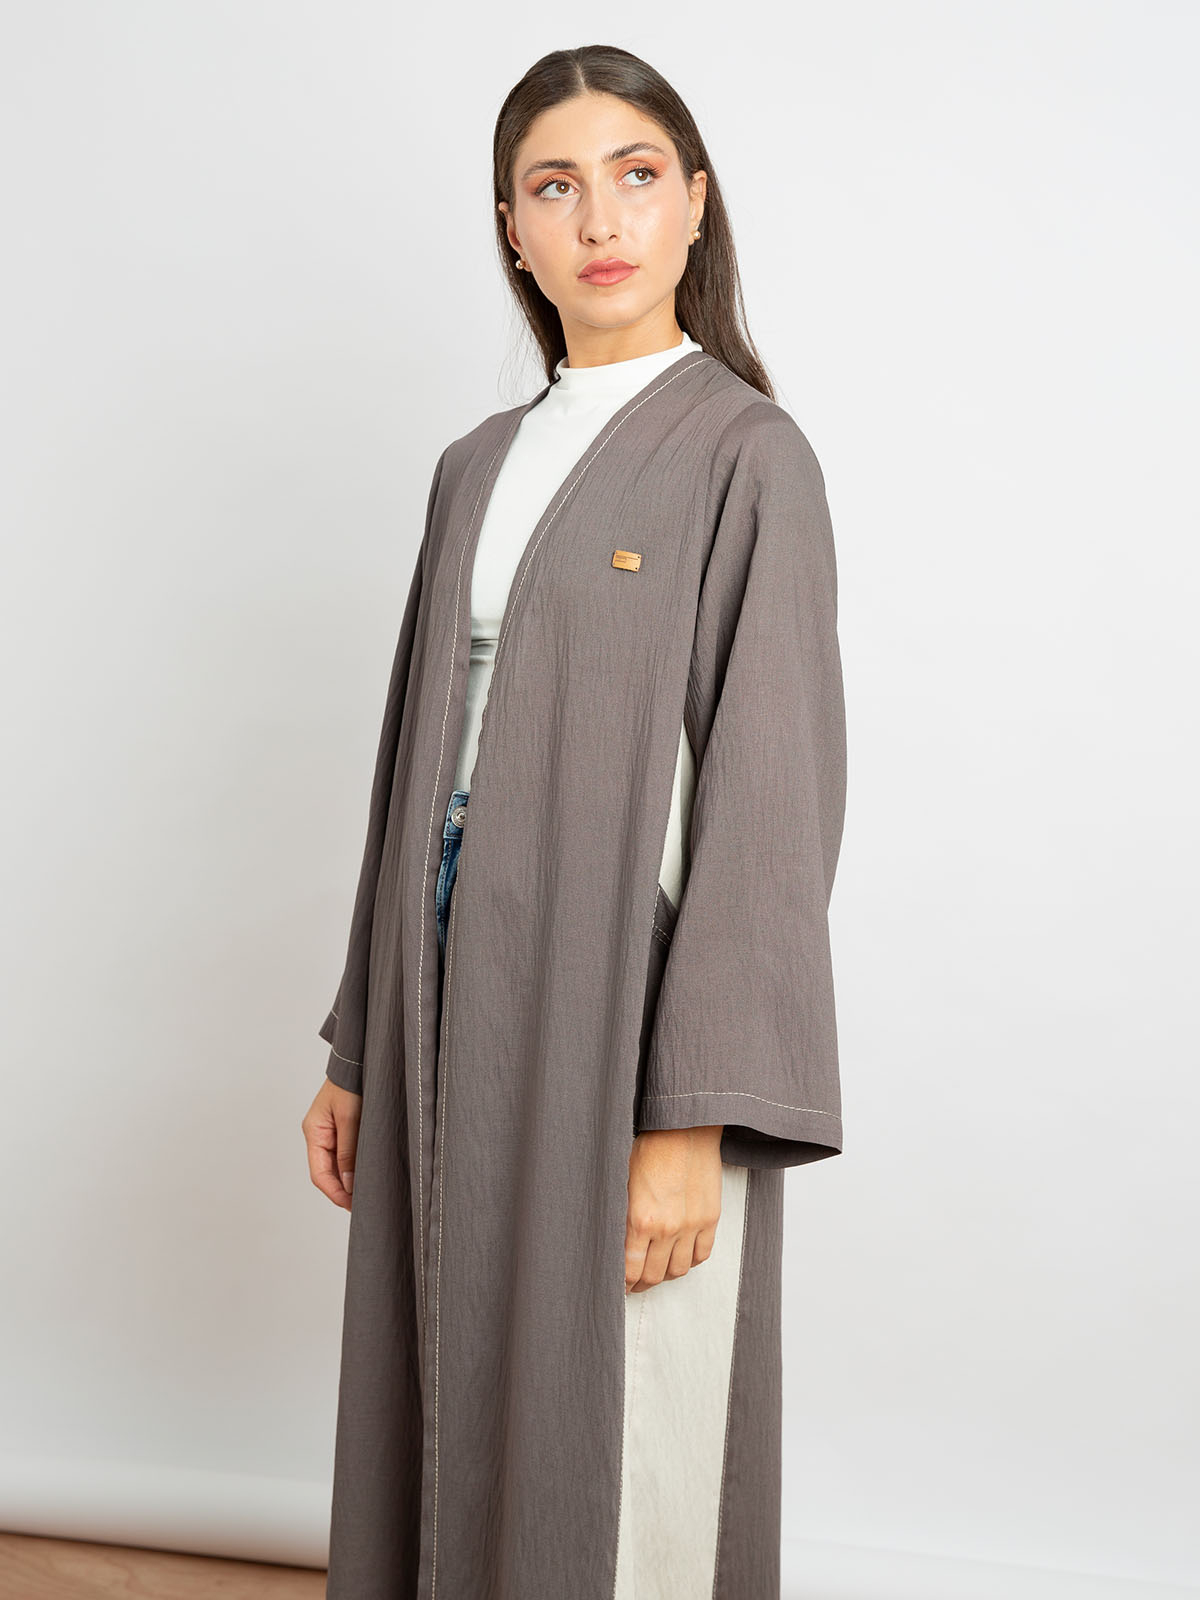 Brown with Beige - Two Colors Long Open Abaya in Linen-feel Crepe with Pockets 